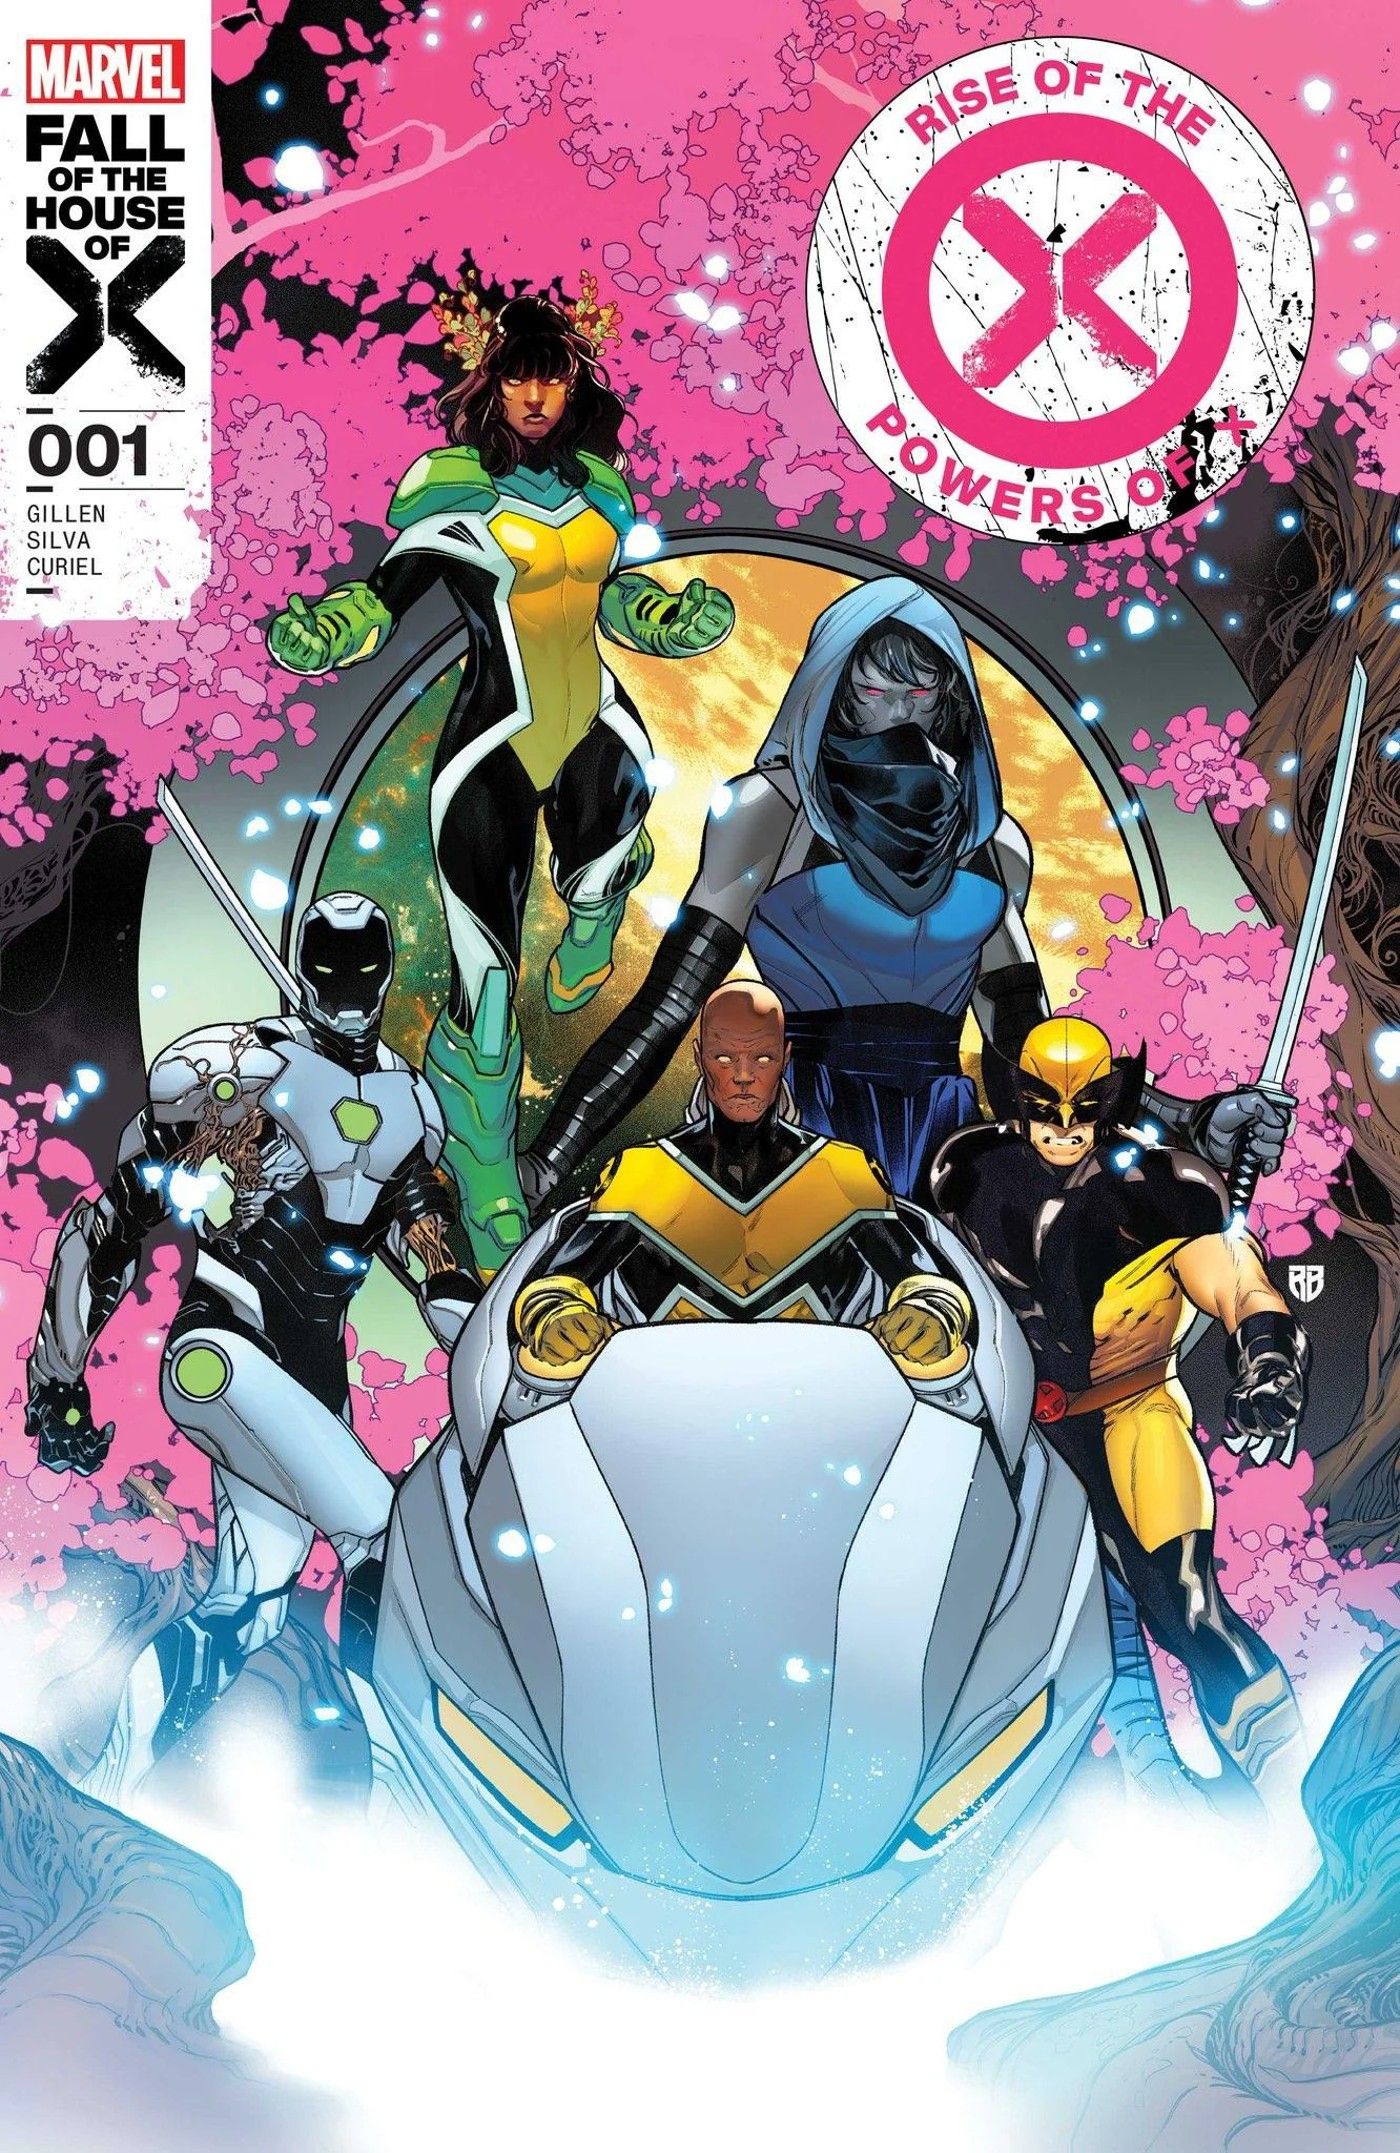 x-men rise of the powers of x r b silva cover team shot with wolverine